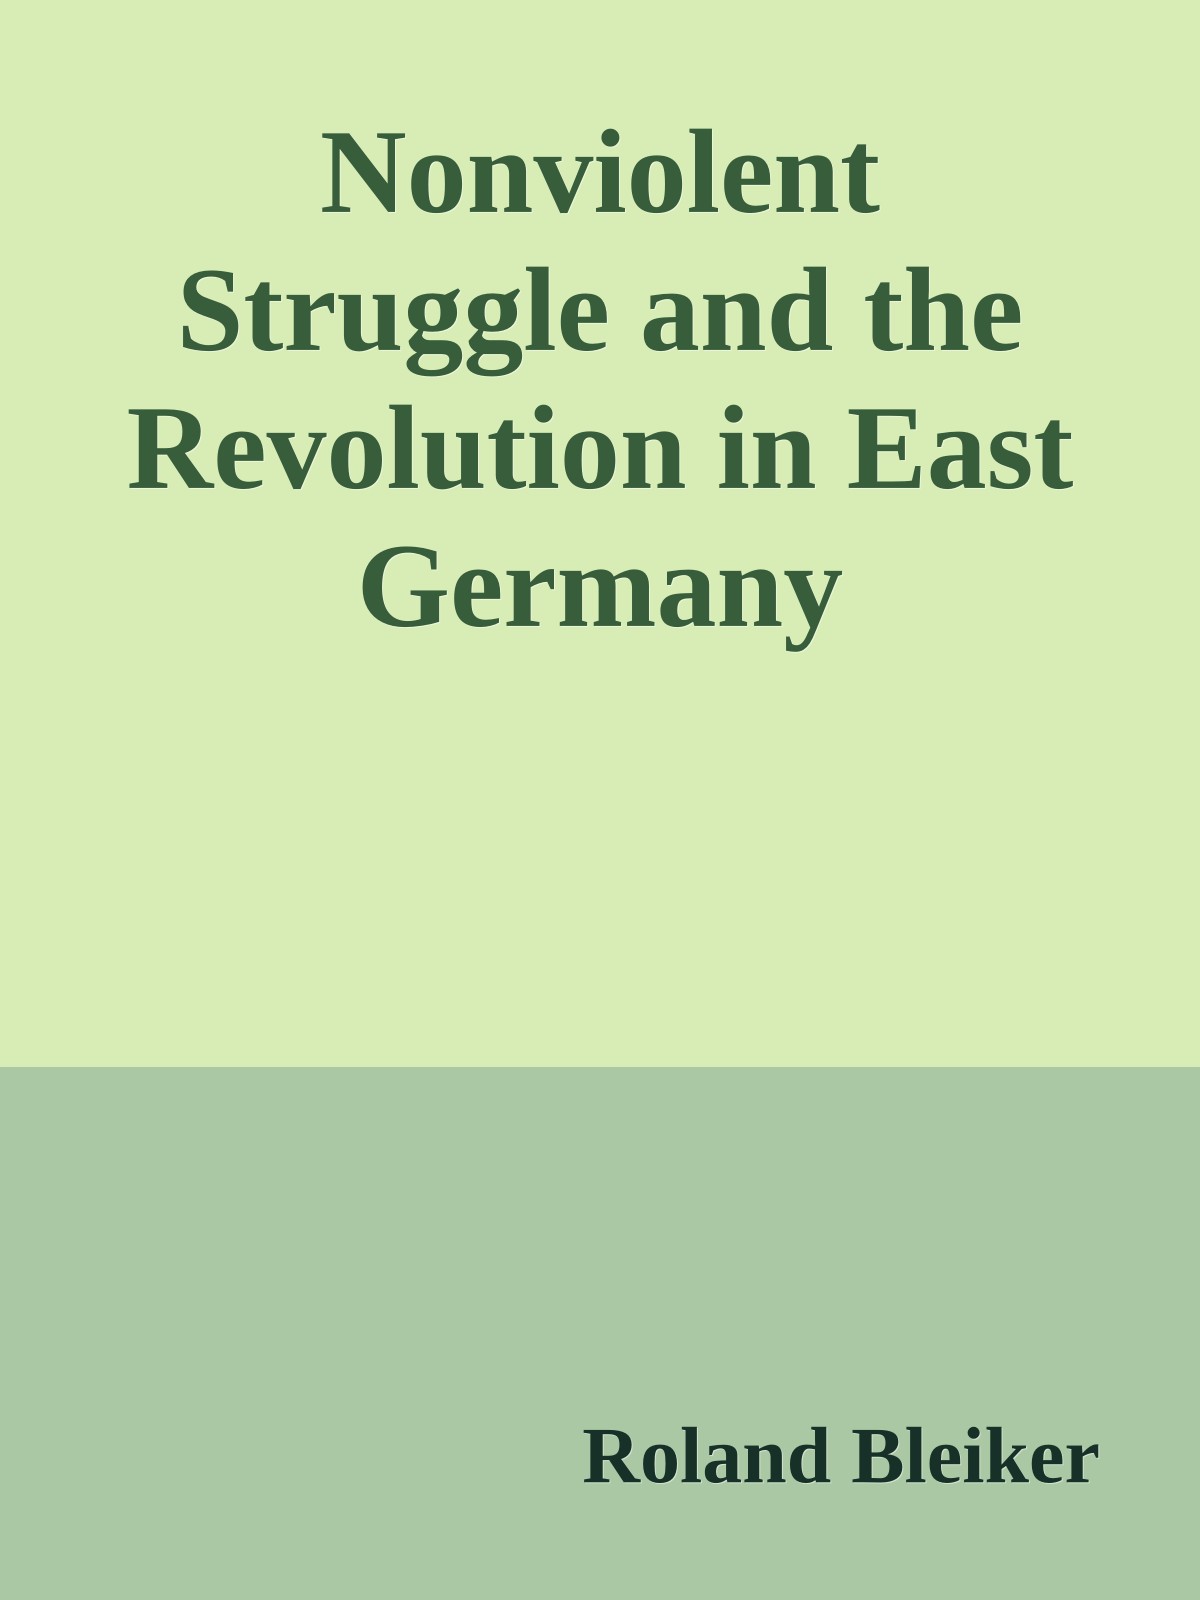 Nonviolent Struggle and the Revolution in East Germany (1993) by Roland Bleiker